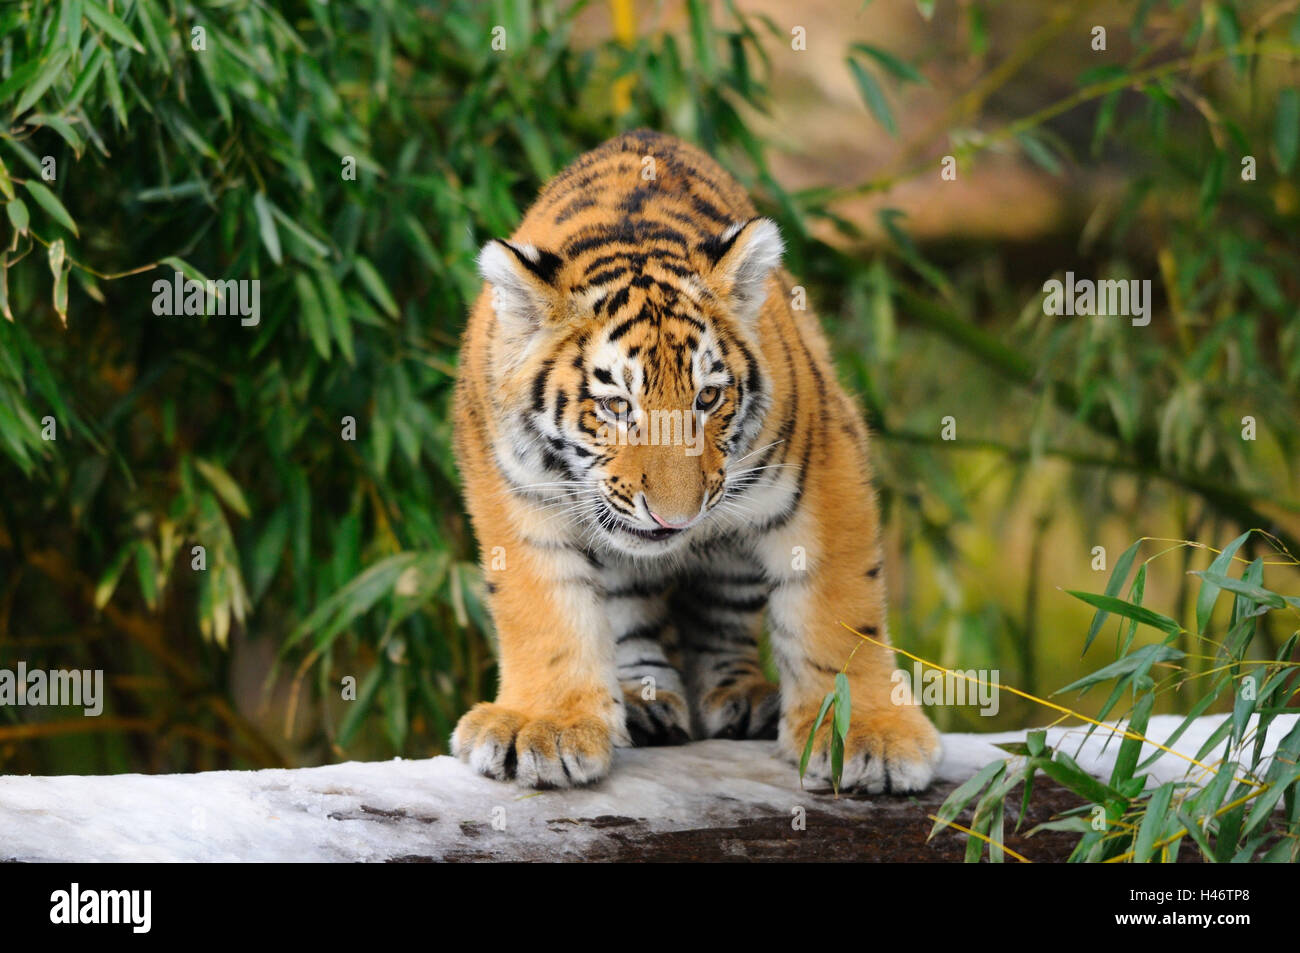 Siberian tiger, Panthera tigris altaica, young animal, trunk, head-on, stand, Stock Photo